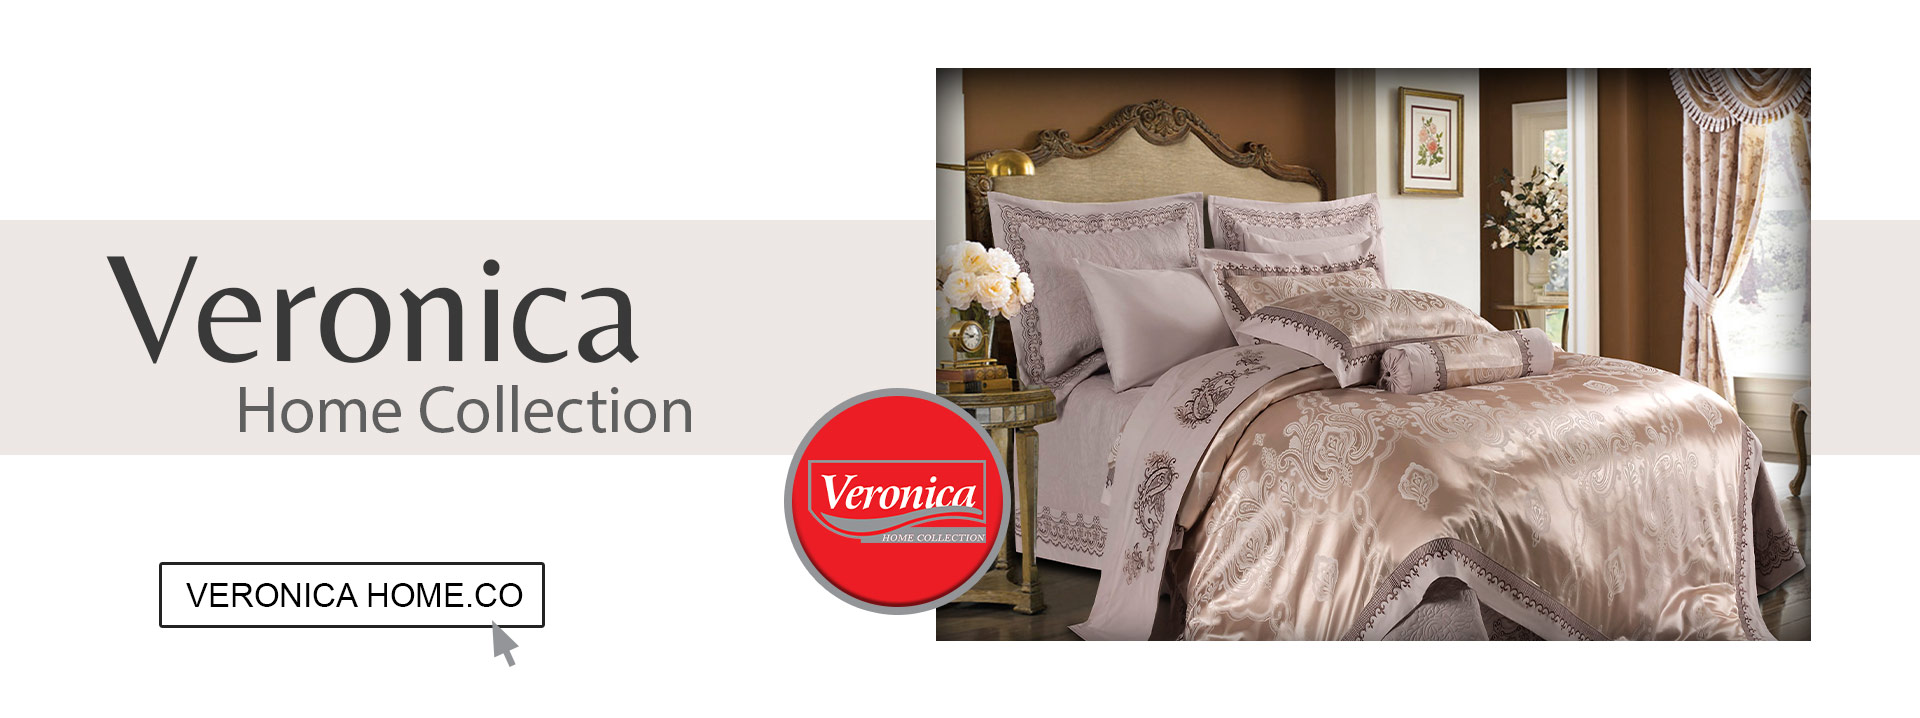 BANNER veronica HOME 04 4